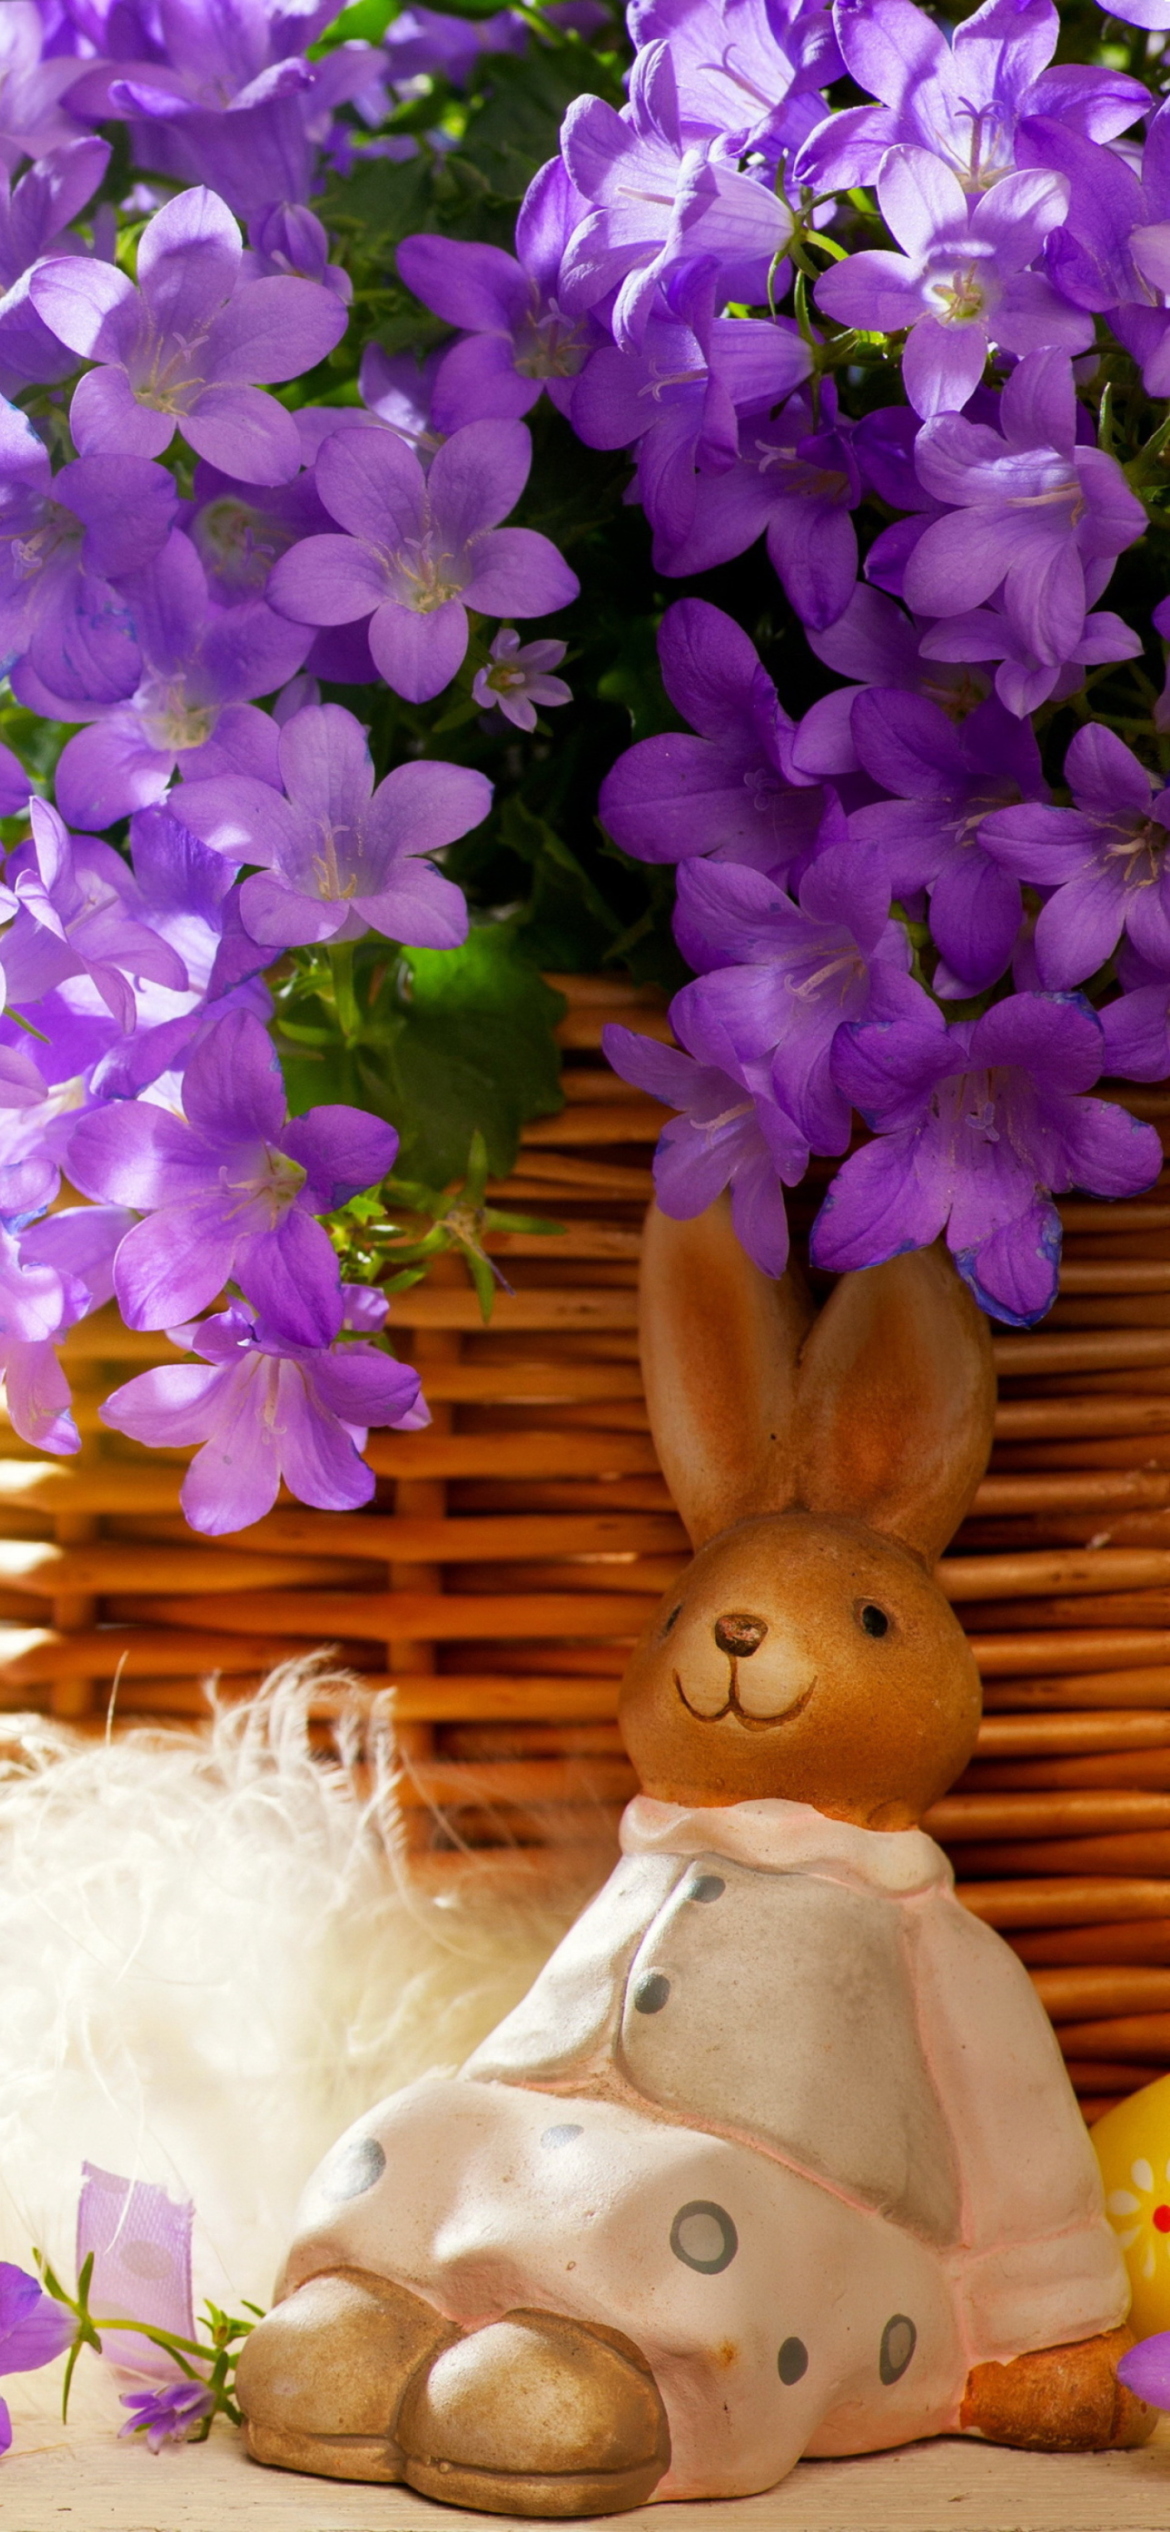 Easter Rabbit And Purple Flowers wallpaper 1170x2532